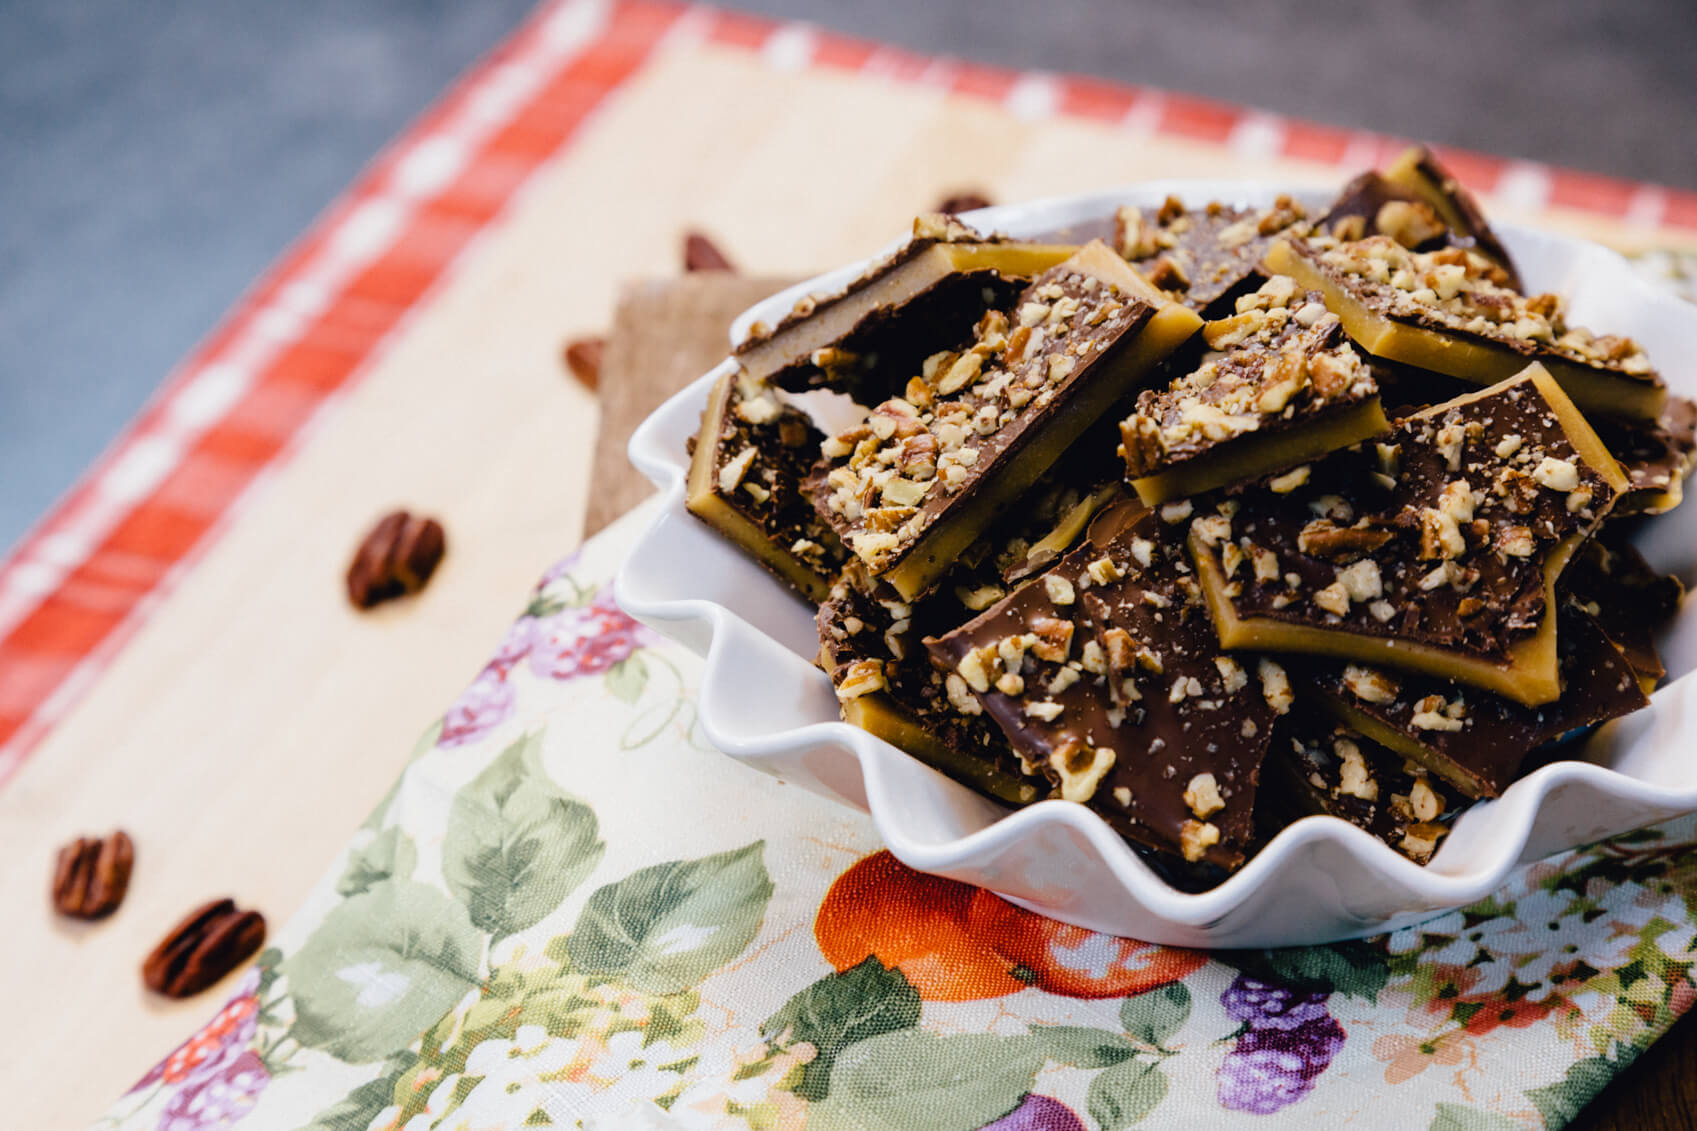 You can top your toffee with chocolate and chopped nuts.